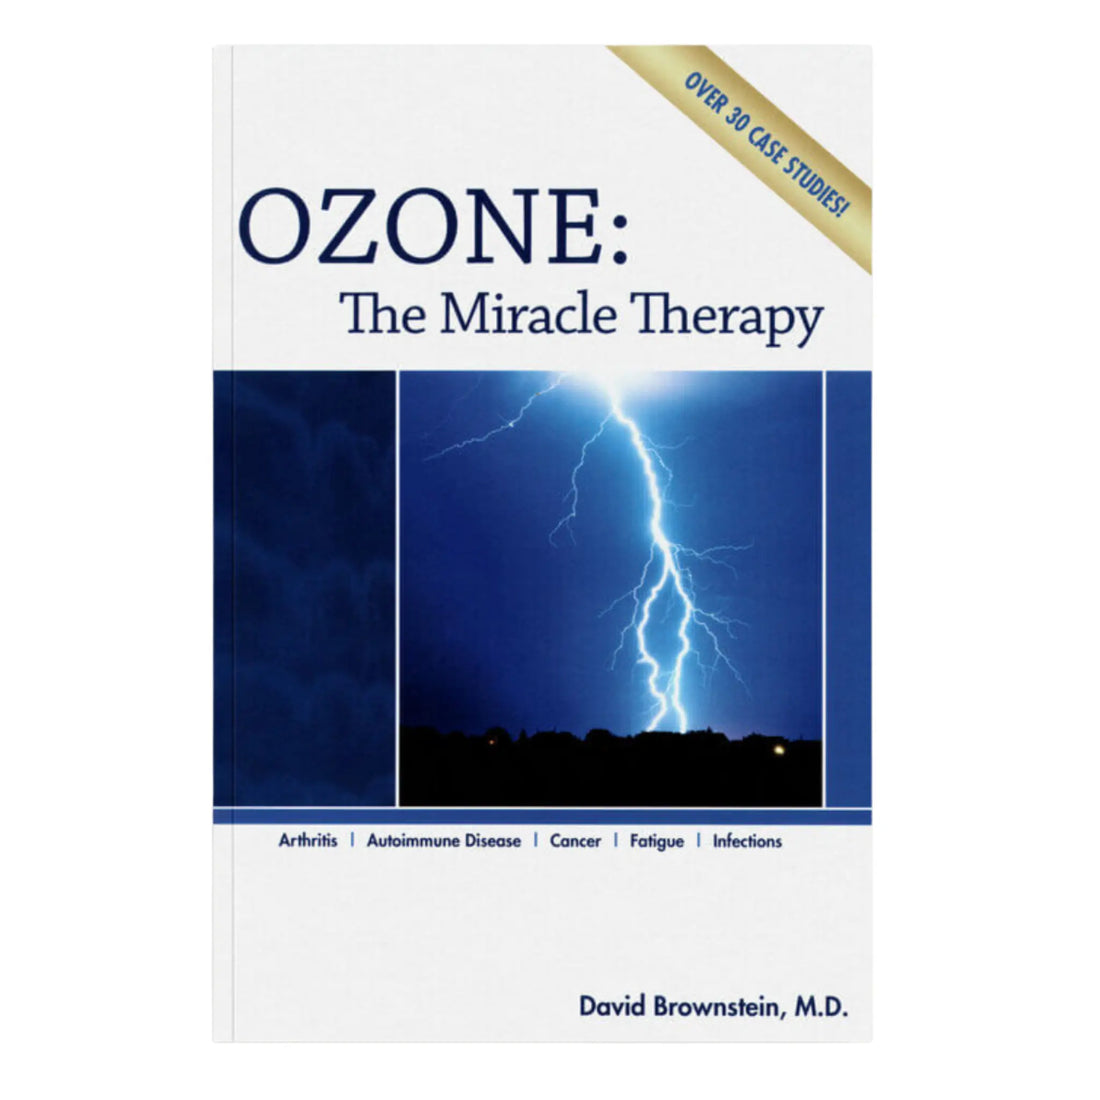 photo of the book ozone the miracle therapy